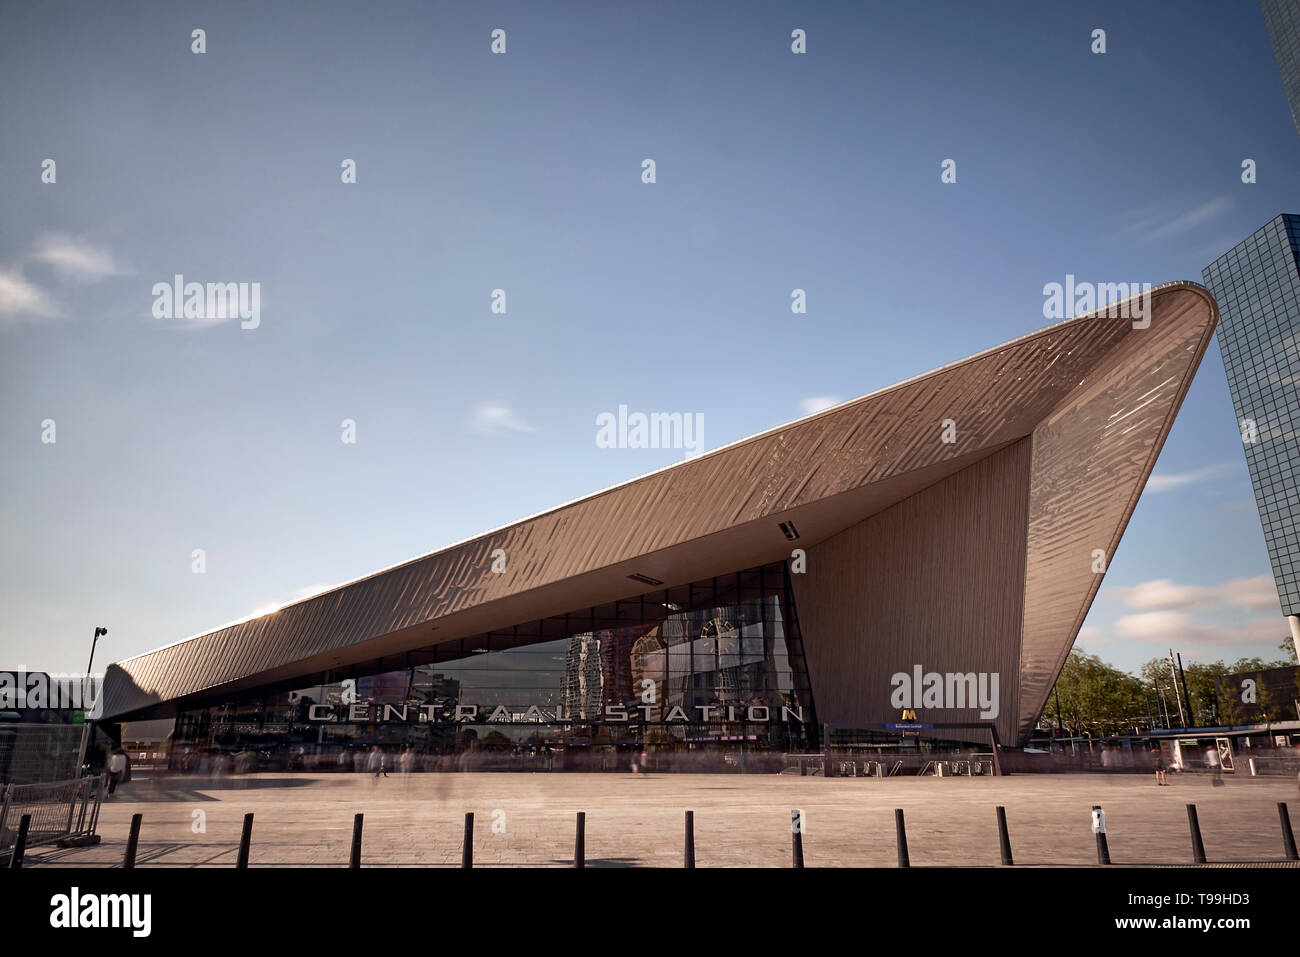 Amazing image of the new central train station in the city centre of Rotterdam Stock Photo